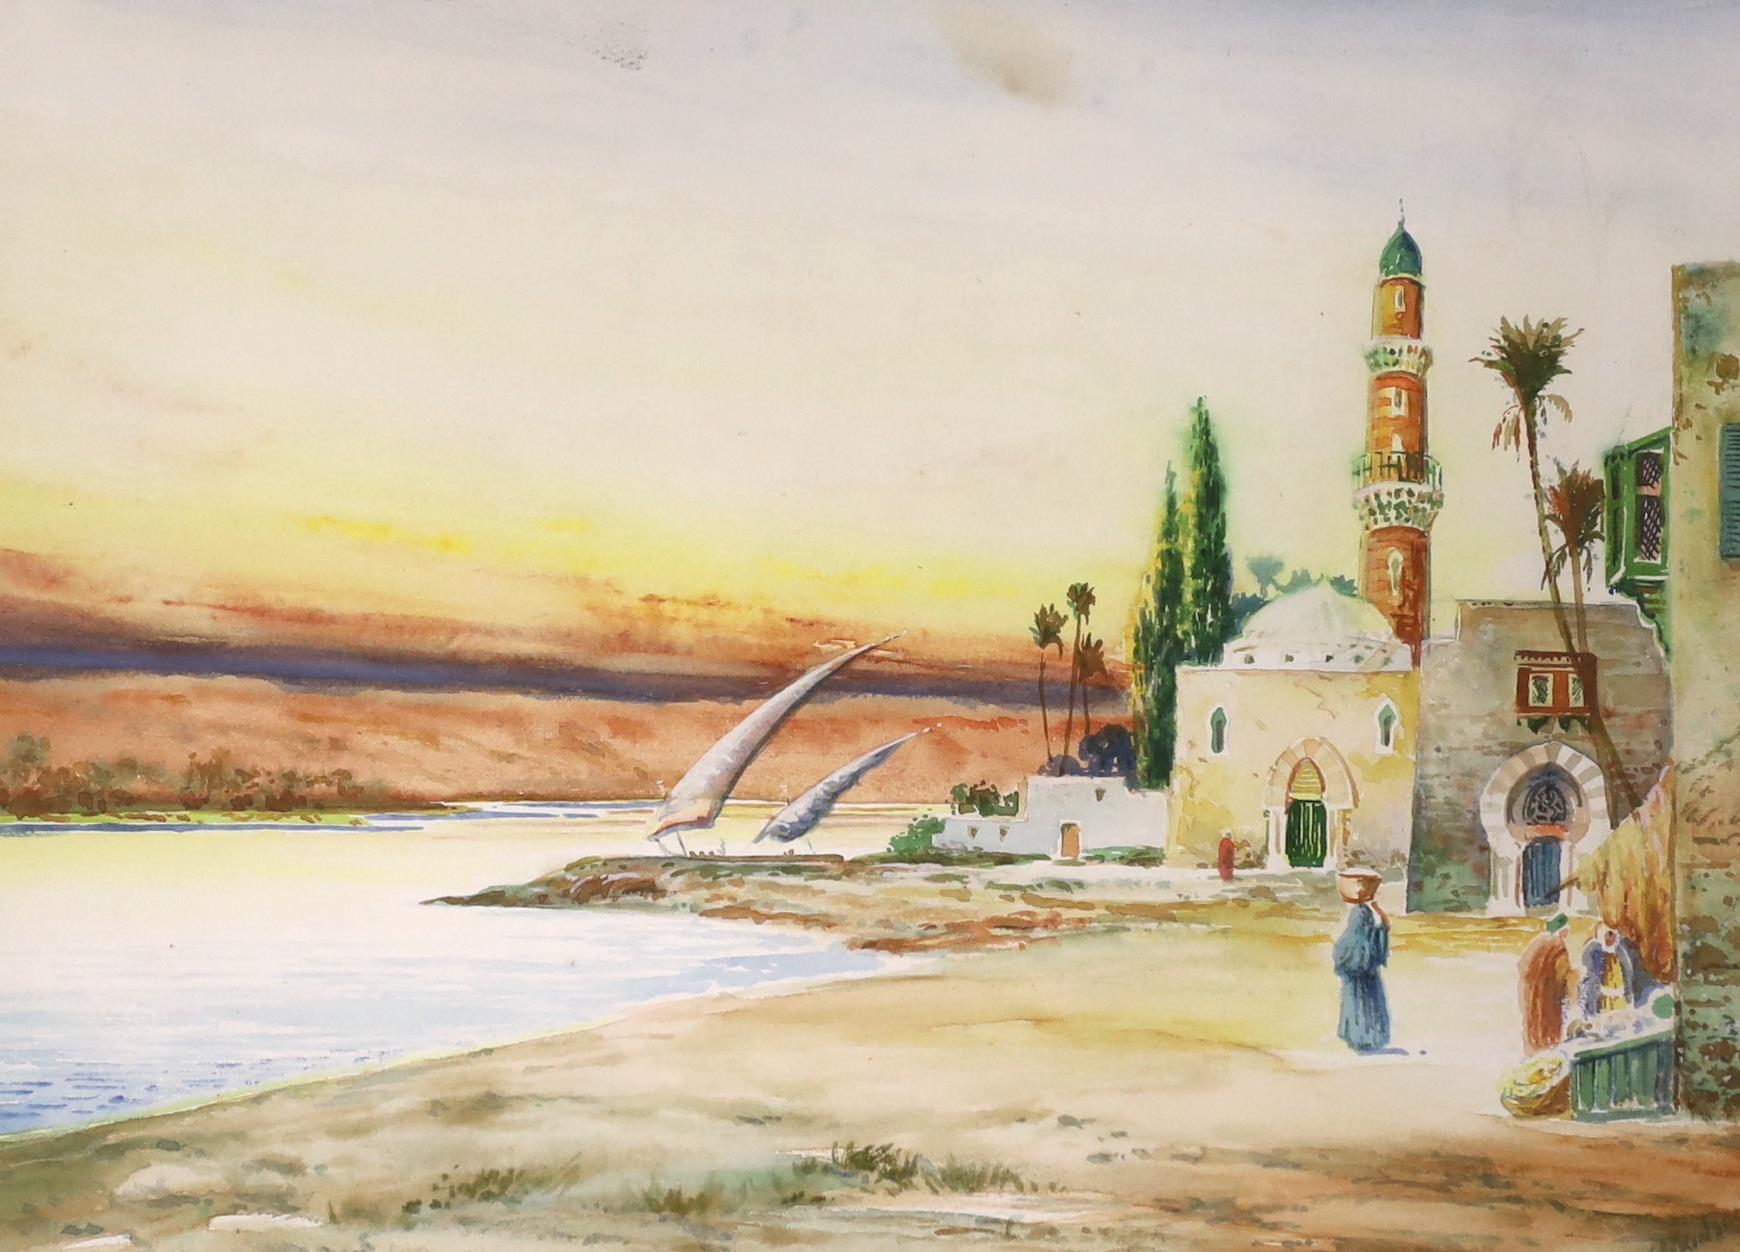 T. W. Atkinson (1942), mid 20th century set of three watercolours, Eastern landscapes with figures - Image 3 of 4